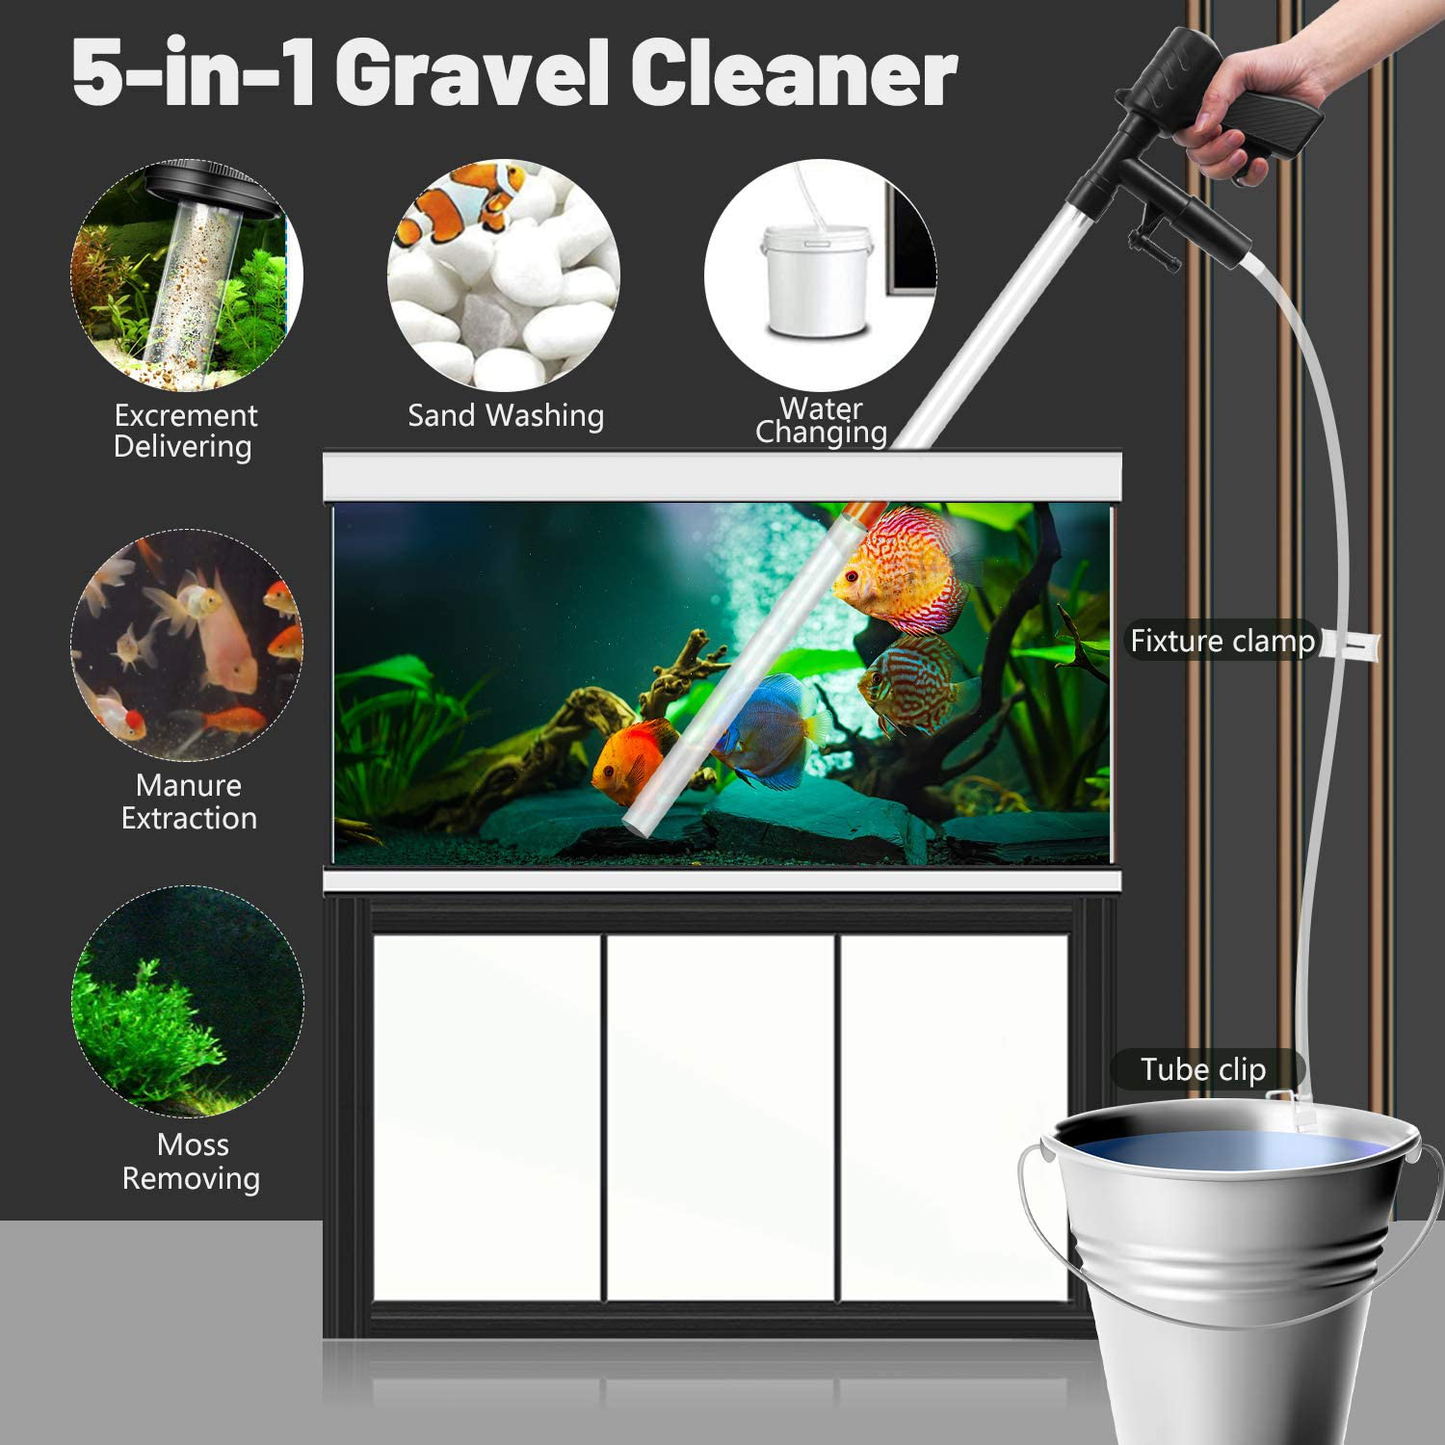 KAREEME Aquarium Gravel Cleaner, Quick and Long Nozzle Water Changer, Professional Fish Tank Sand Cleaner Kit with Air-Pressing Button and Adjustable Water Hose Controller - BPA Free